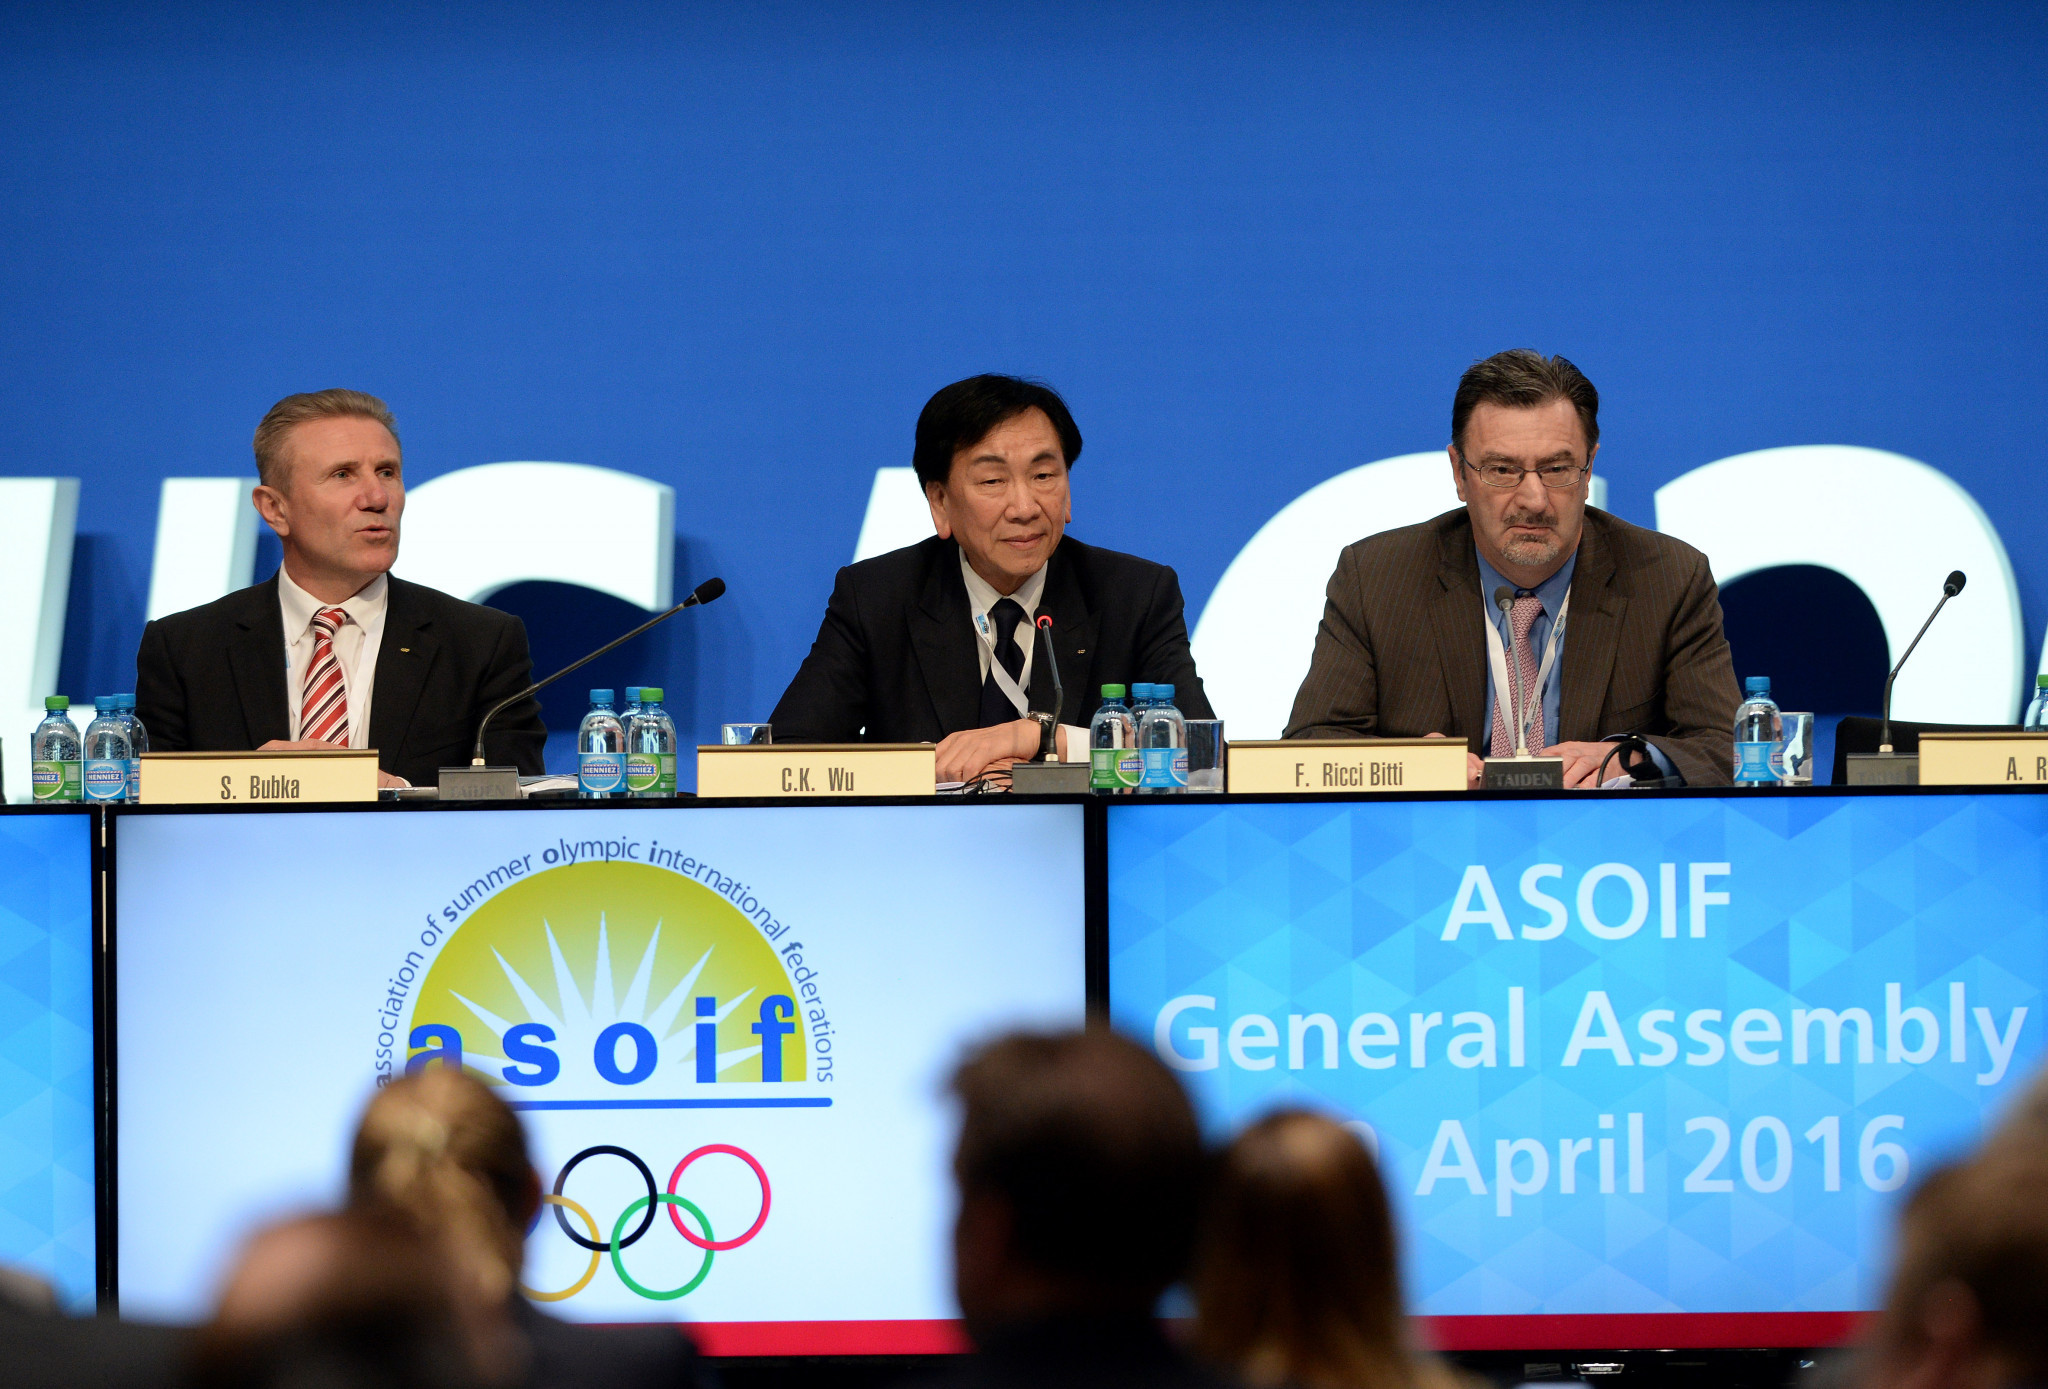 C K Wu has resigned from the ASOIF Council following his departure as AIBA President ©Getty Images